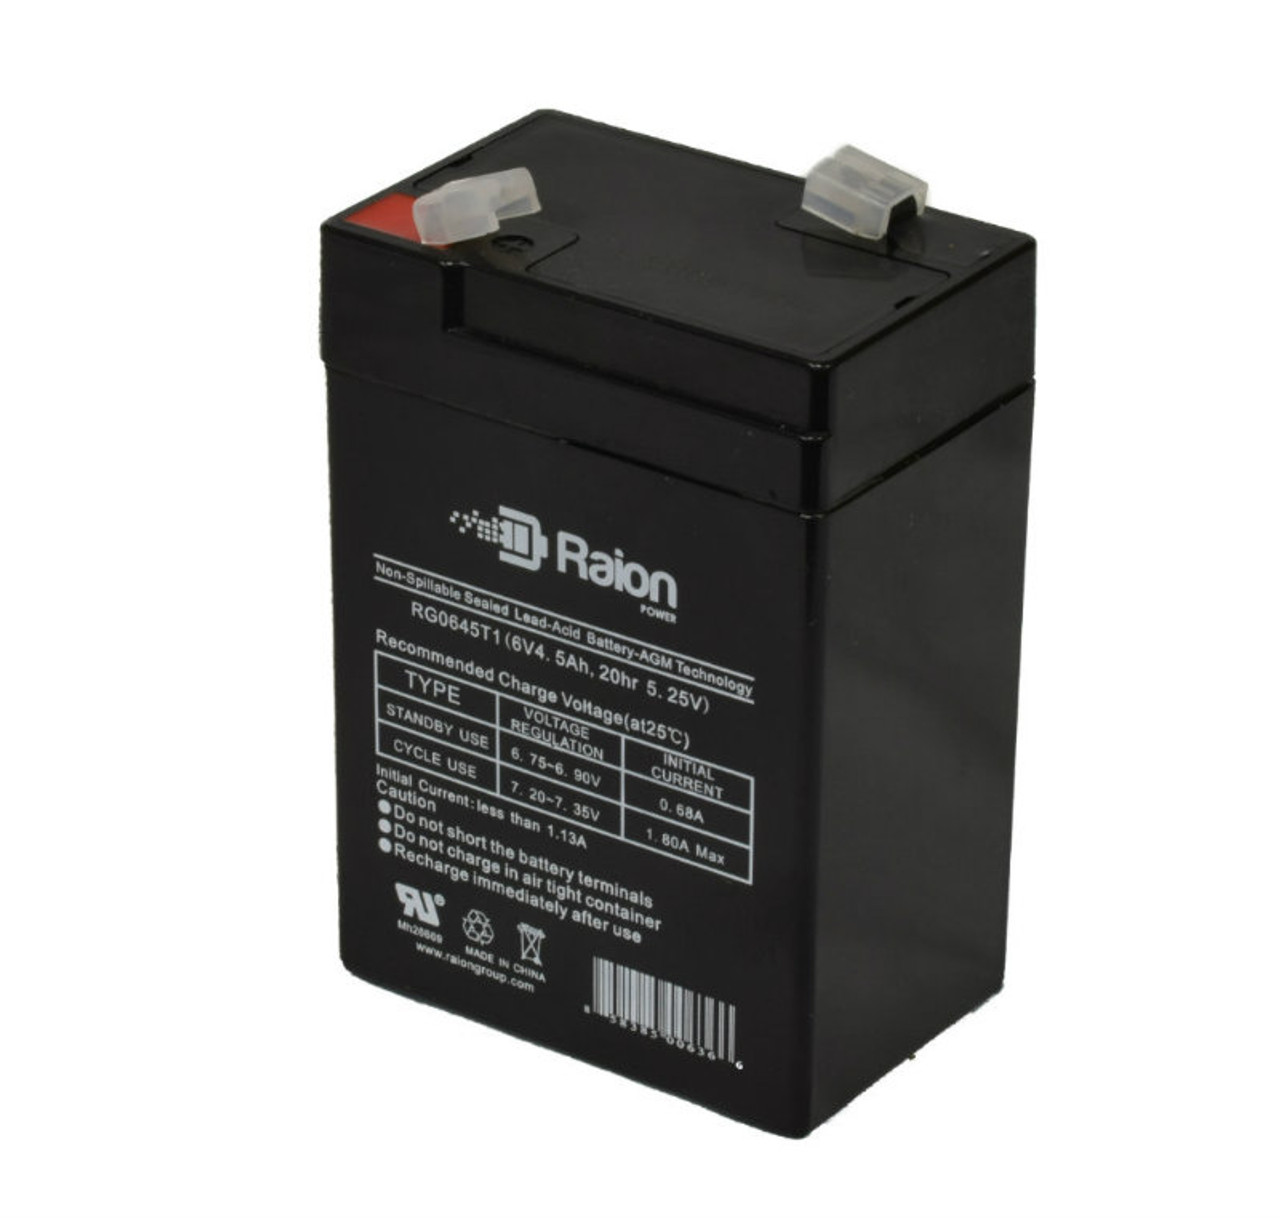 Raion Power RG0645T1 6V 4.5Ah Replacement Battery Cartridge for Power Wheels 00801-1230